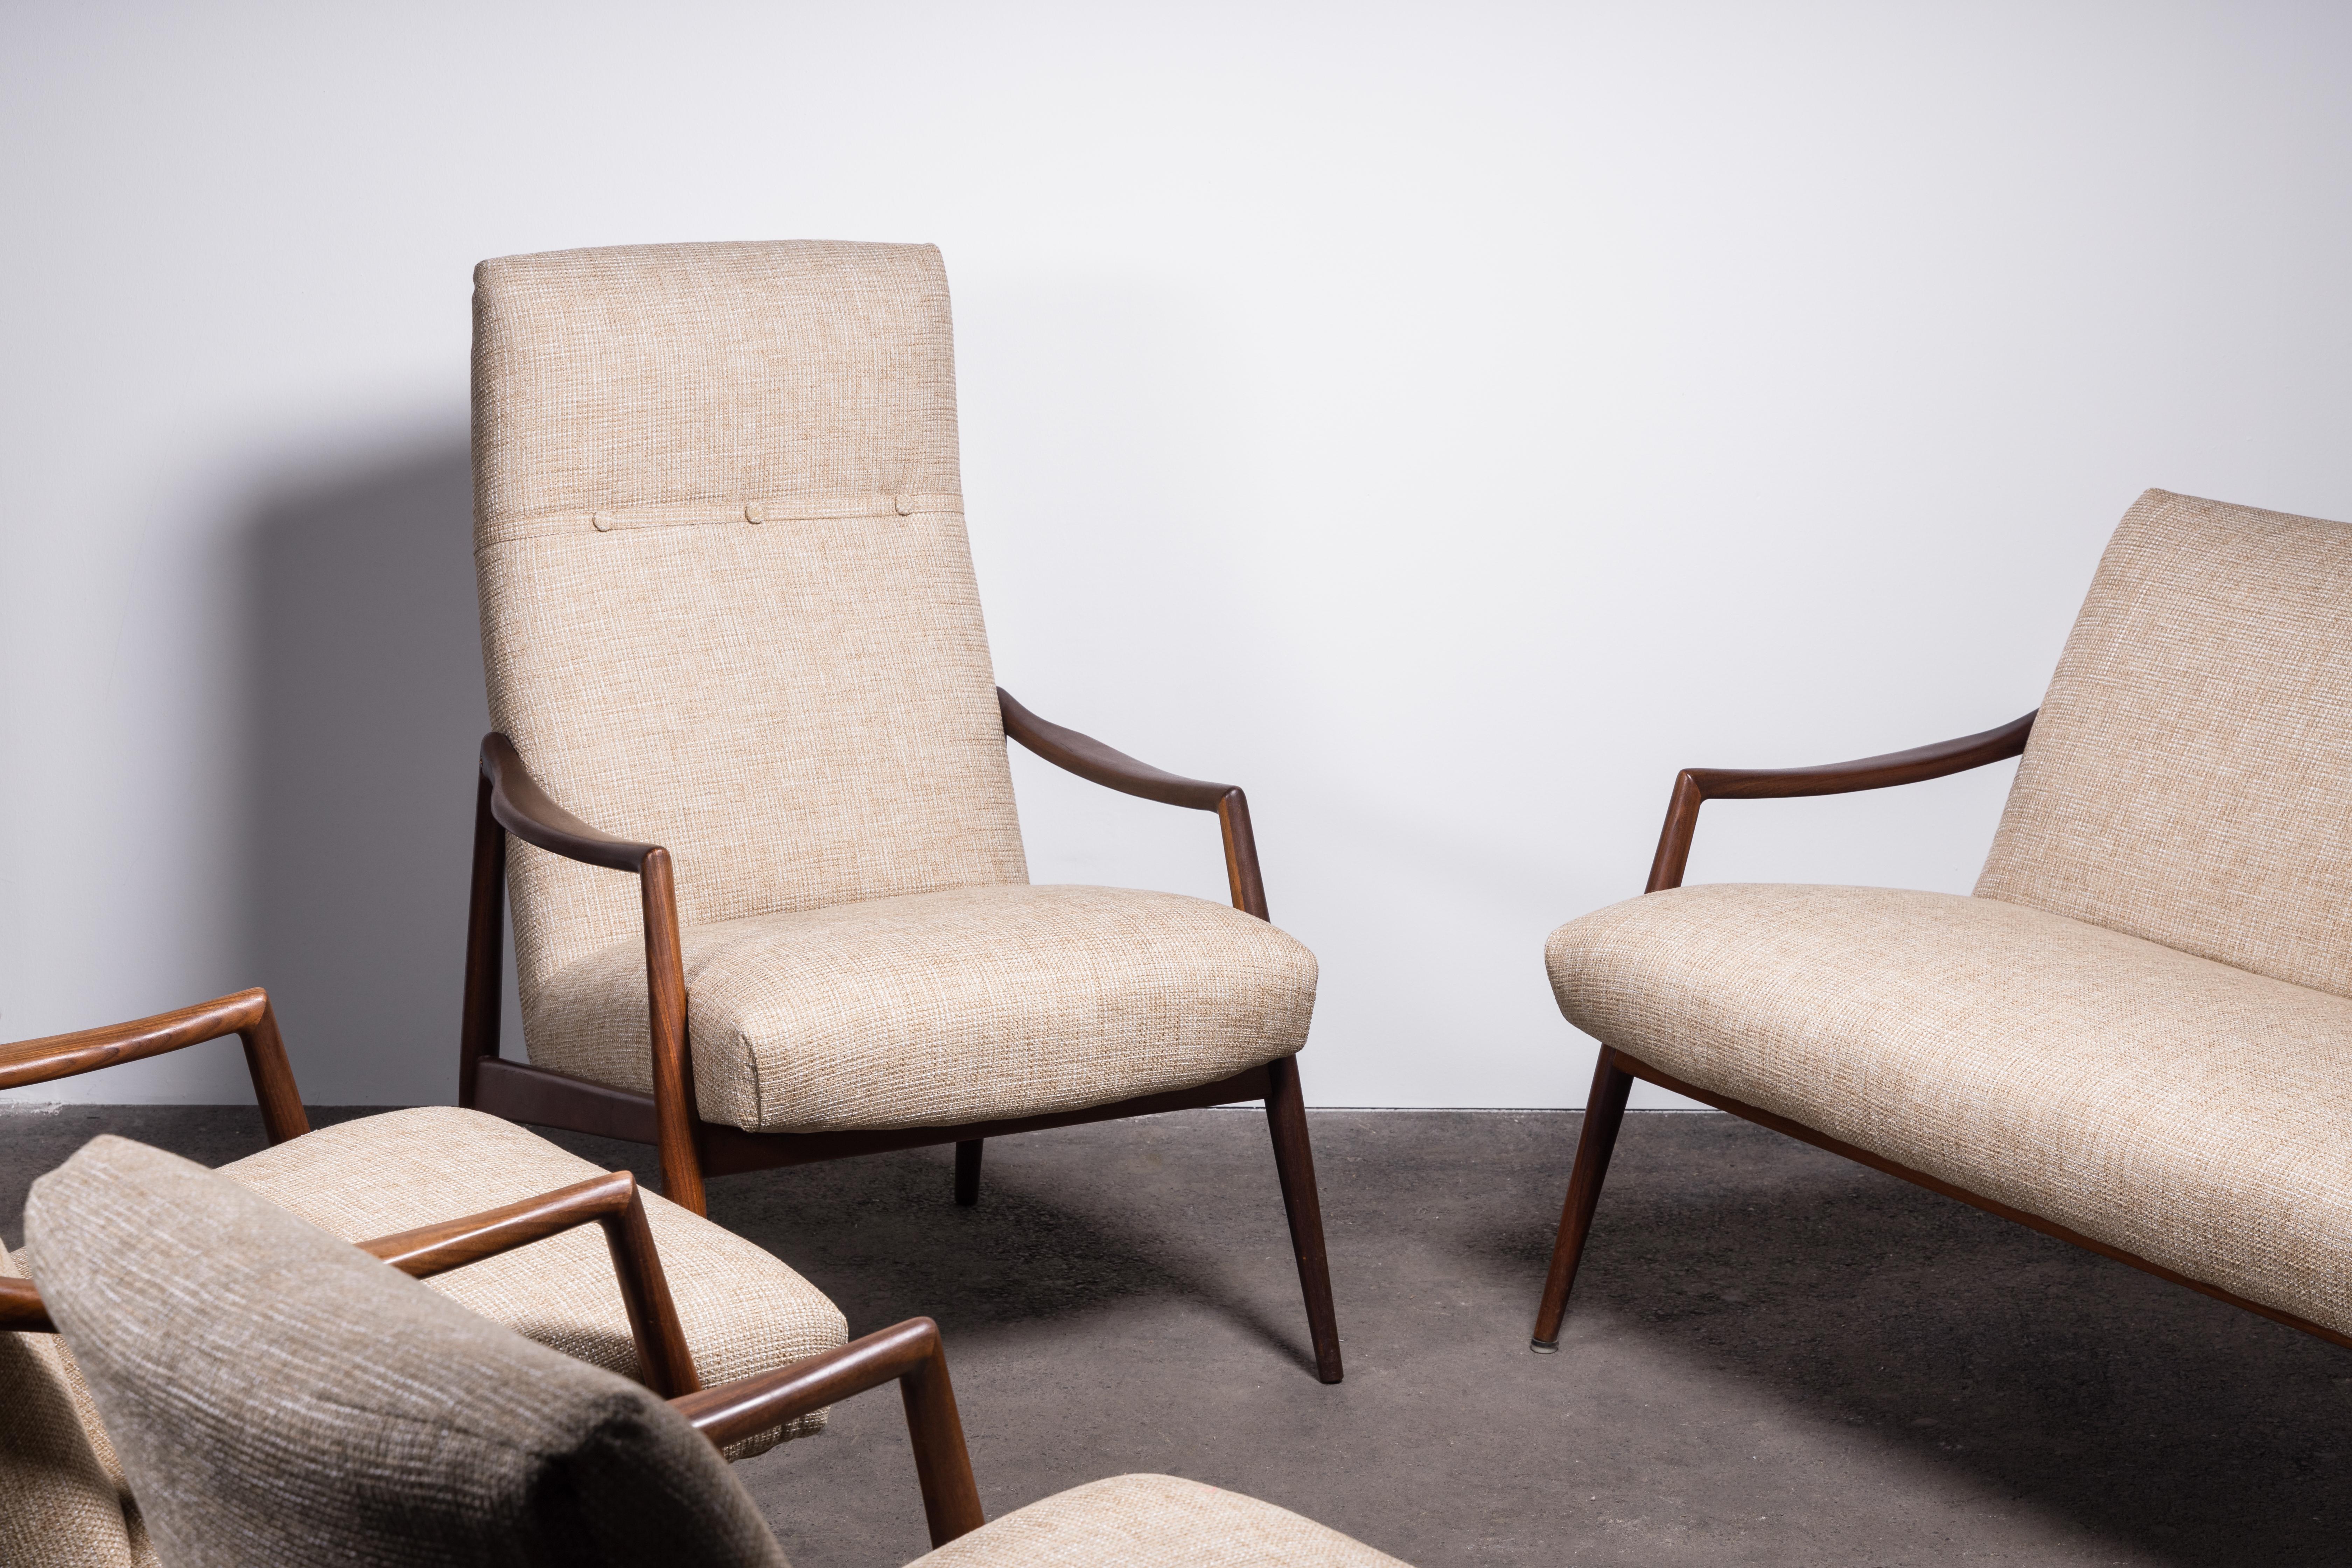 High-Back 1950s Teak Armchair by Lohmeyer upholstered à la Coco Chanel 1